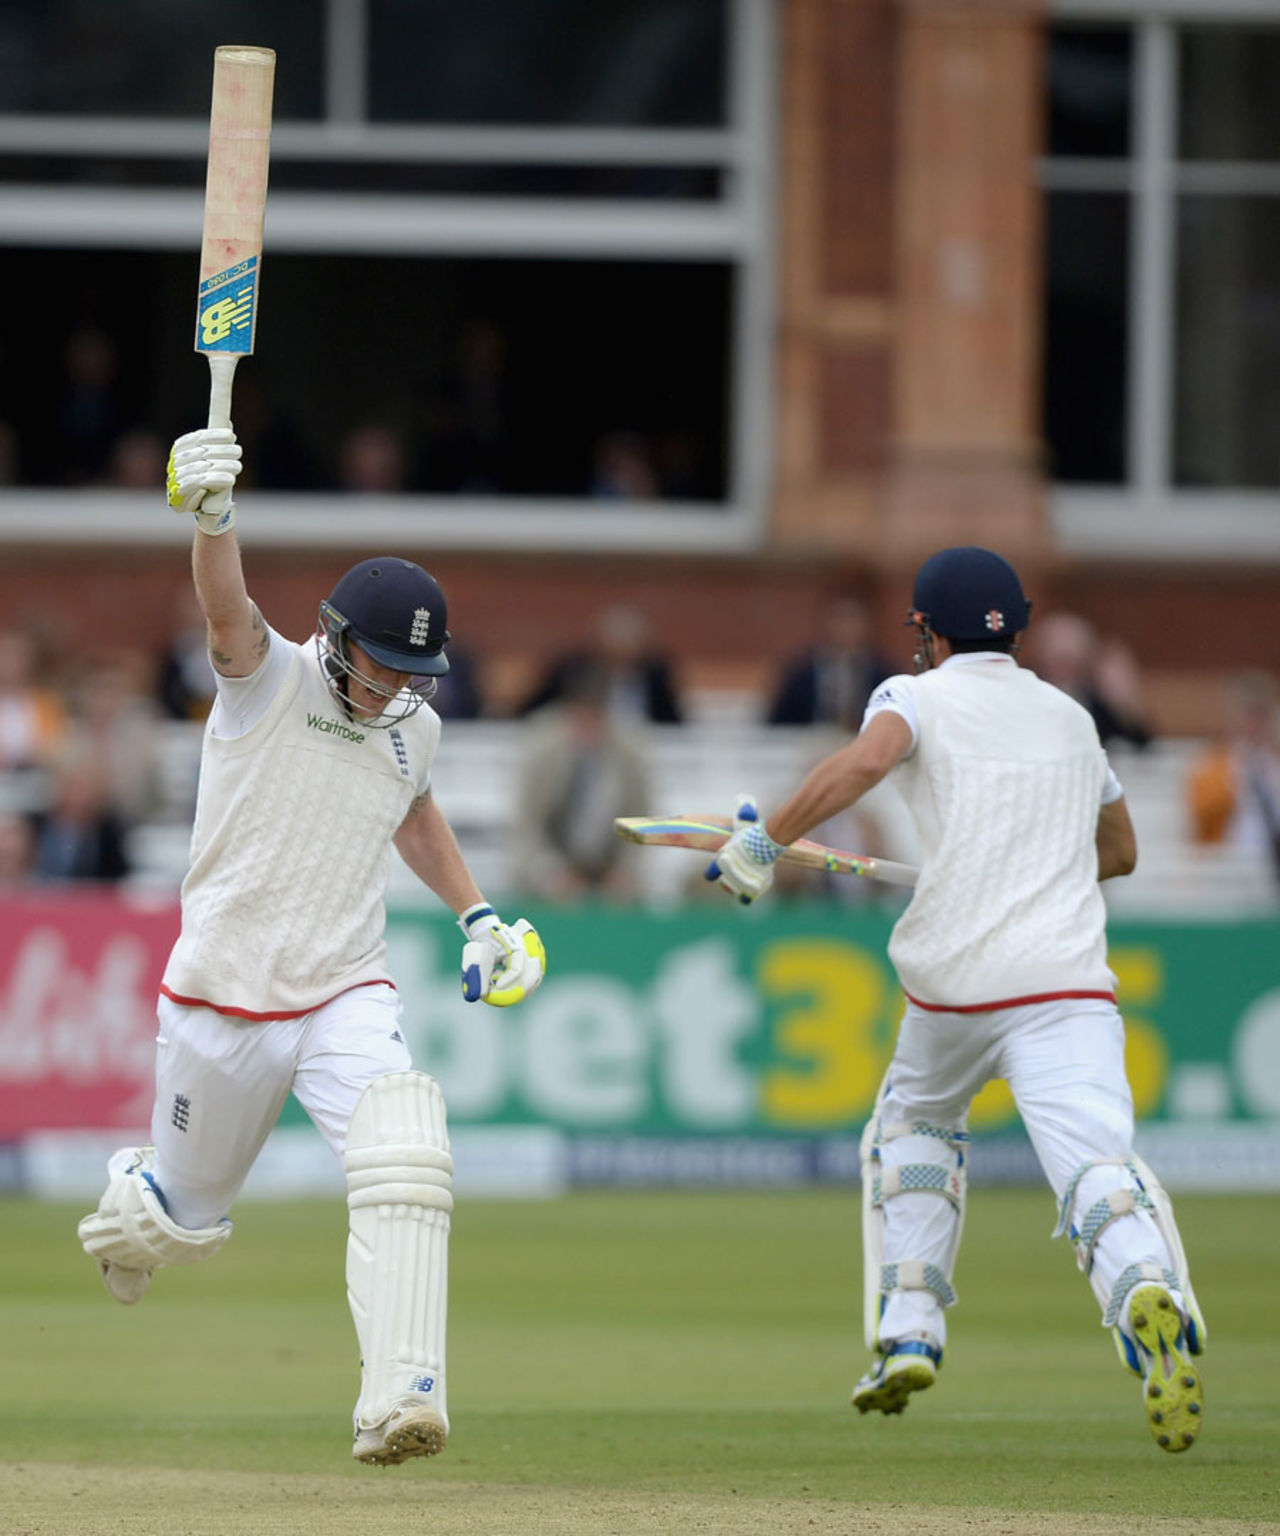 Ben Stokes runs through to complete the fastest Test hundred at Lord's, England v New Zealand, 1st Investec Test, Lord's, 4th day, May 24, 2015